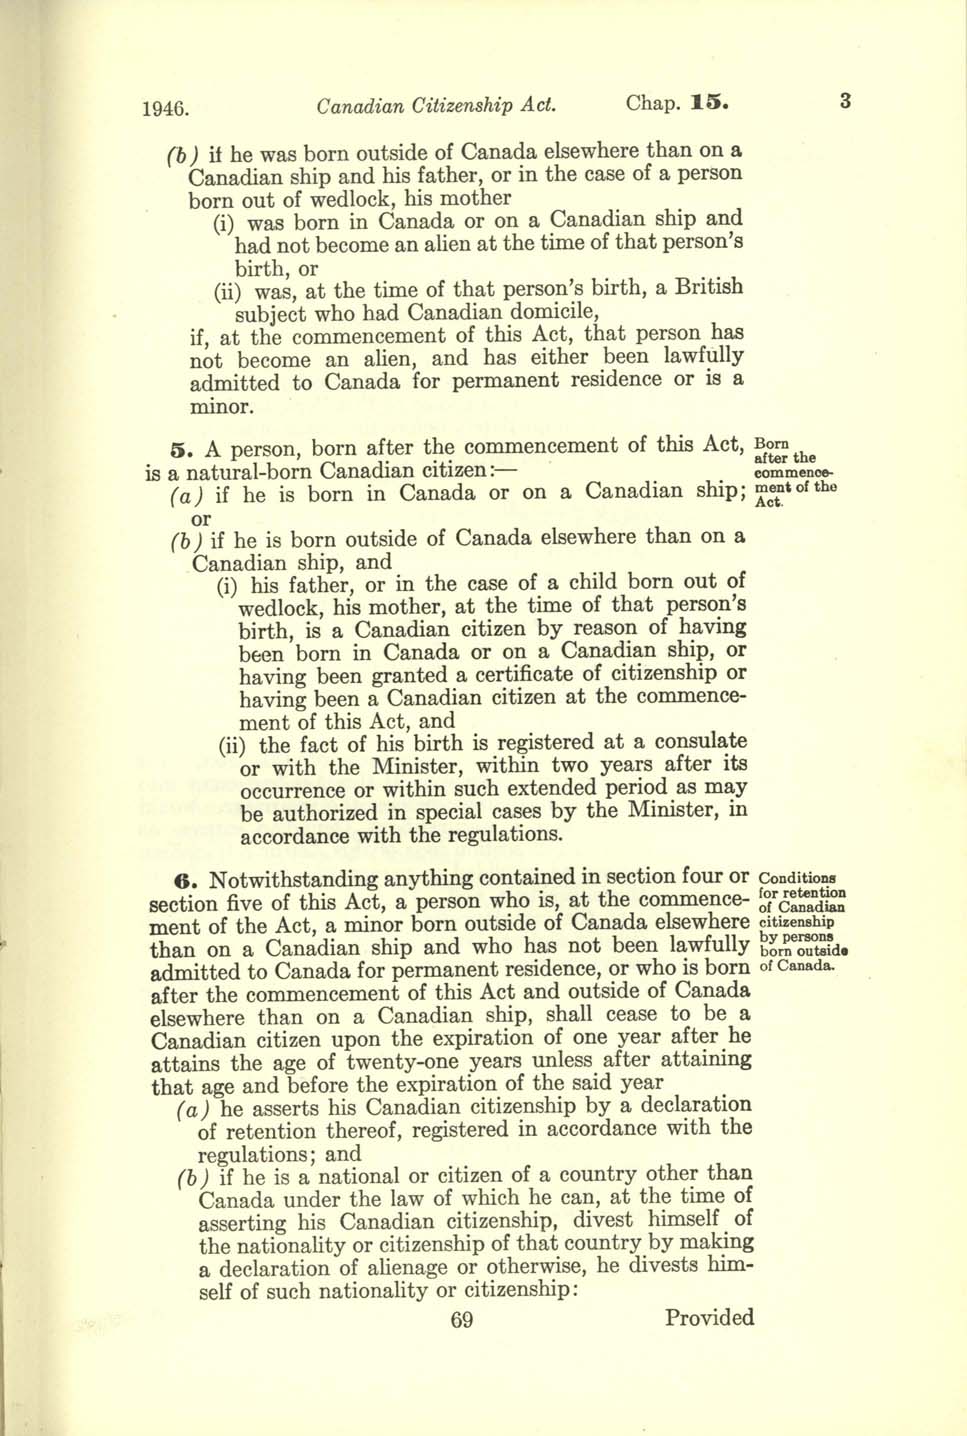 Chap 15 Page 69 Canadian Citizenship Act, 1947